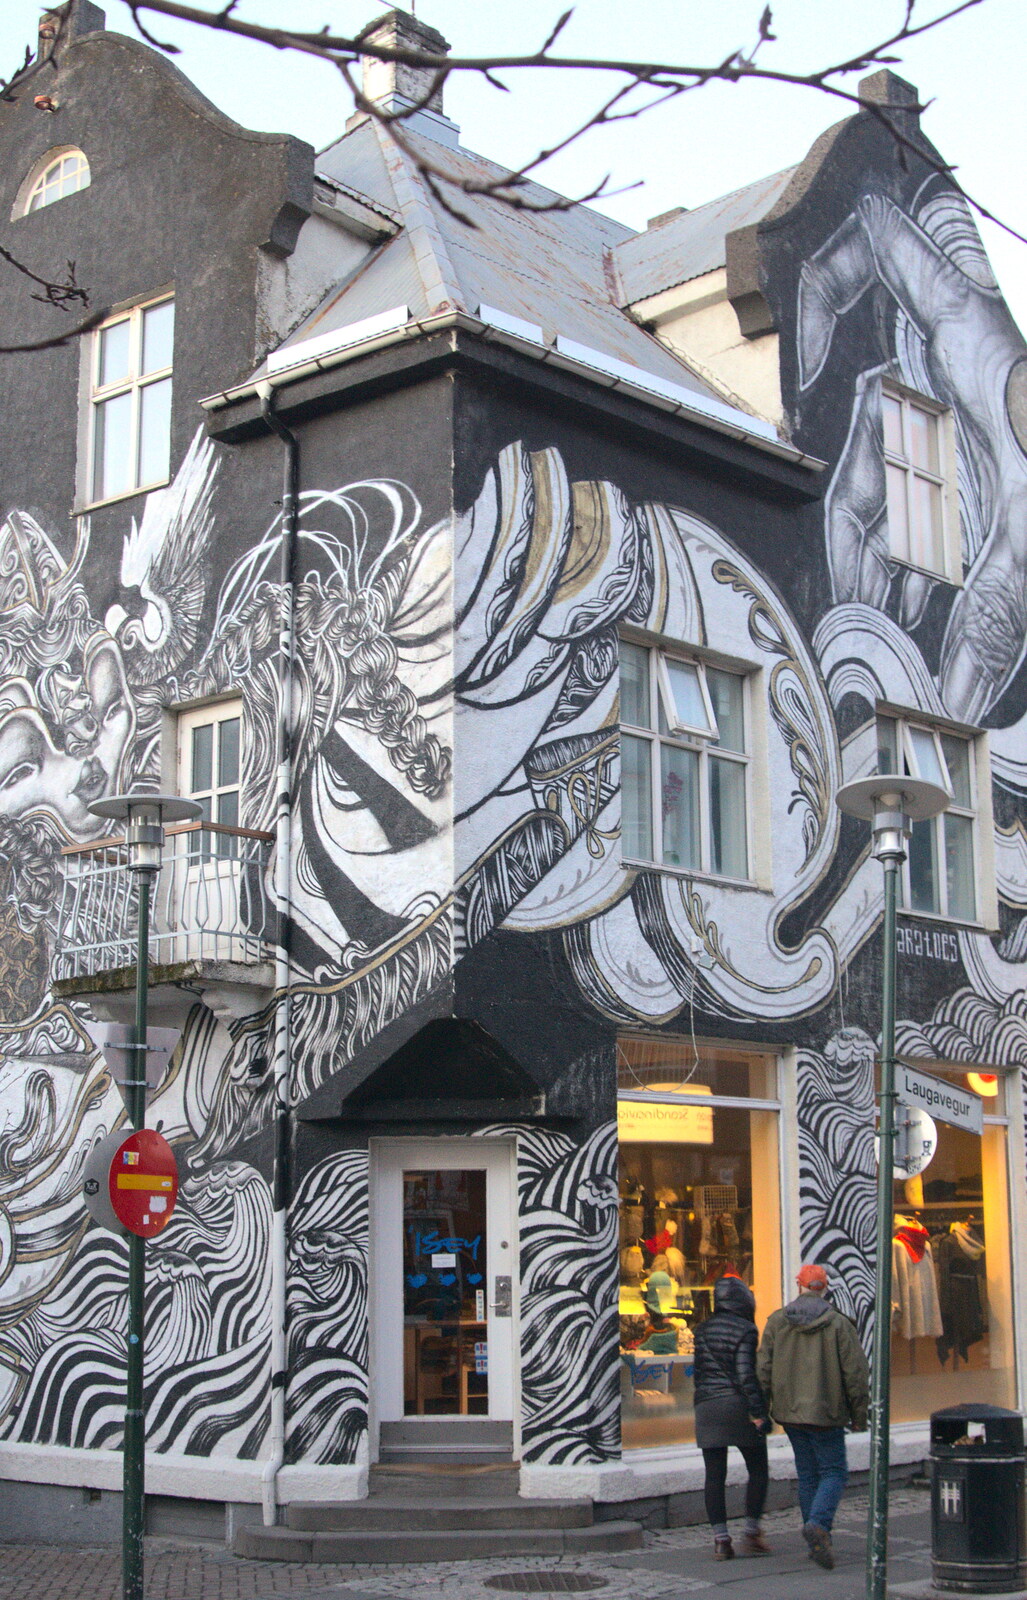 A building on Laugavegur entirely covered in art from A Trip to Reykjavik, Iceland - 20th April 2017